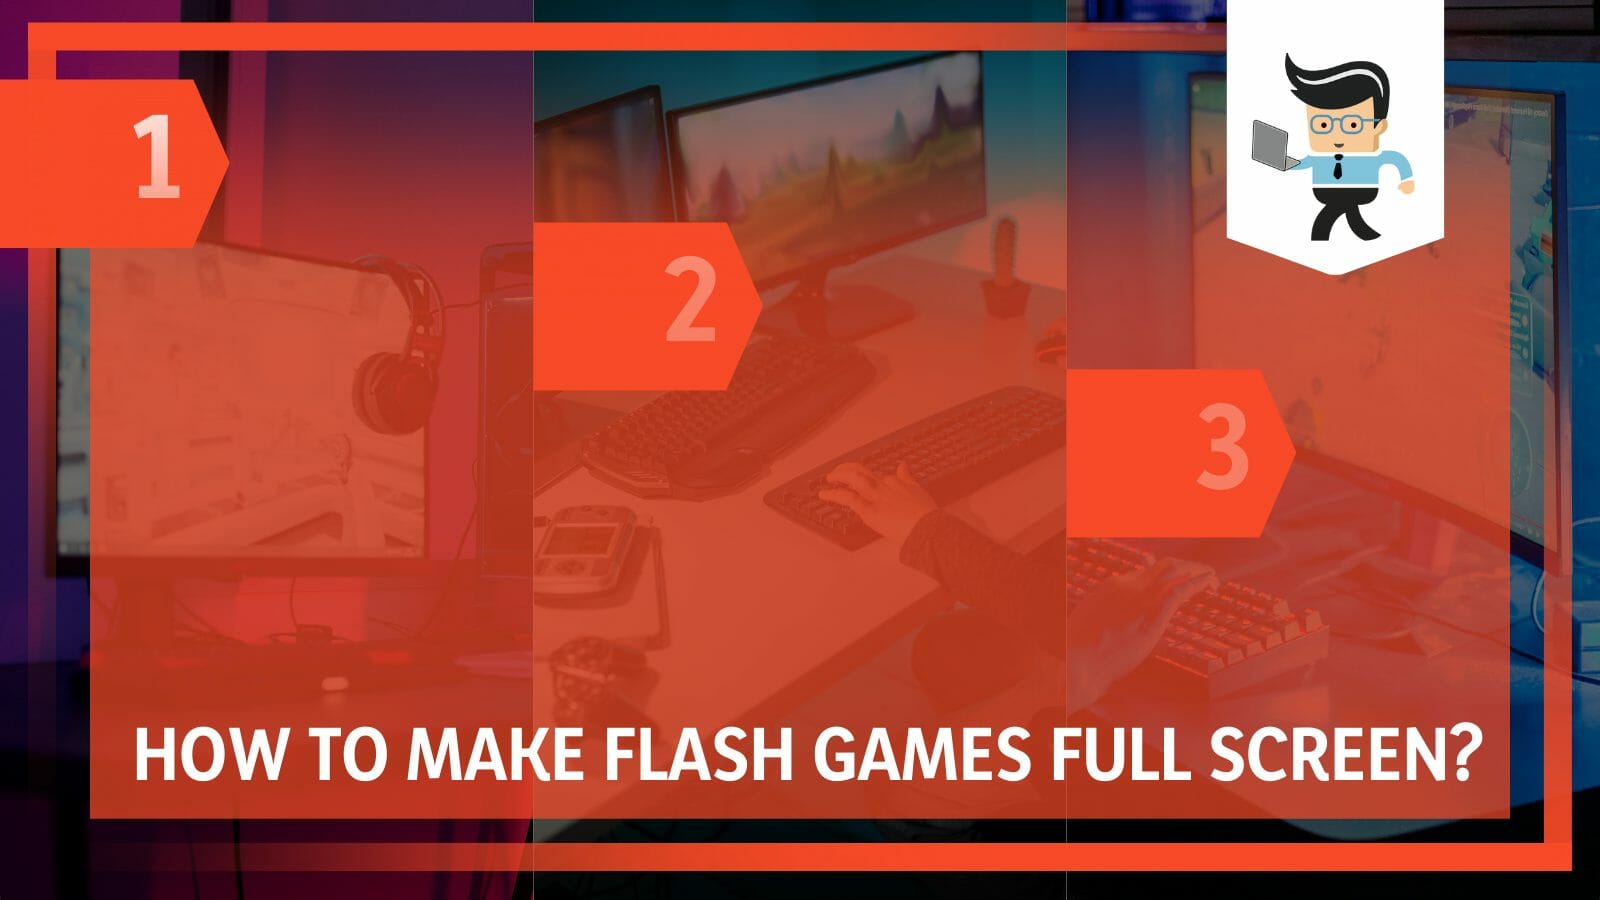 How to Make Flash Games Full Screen